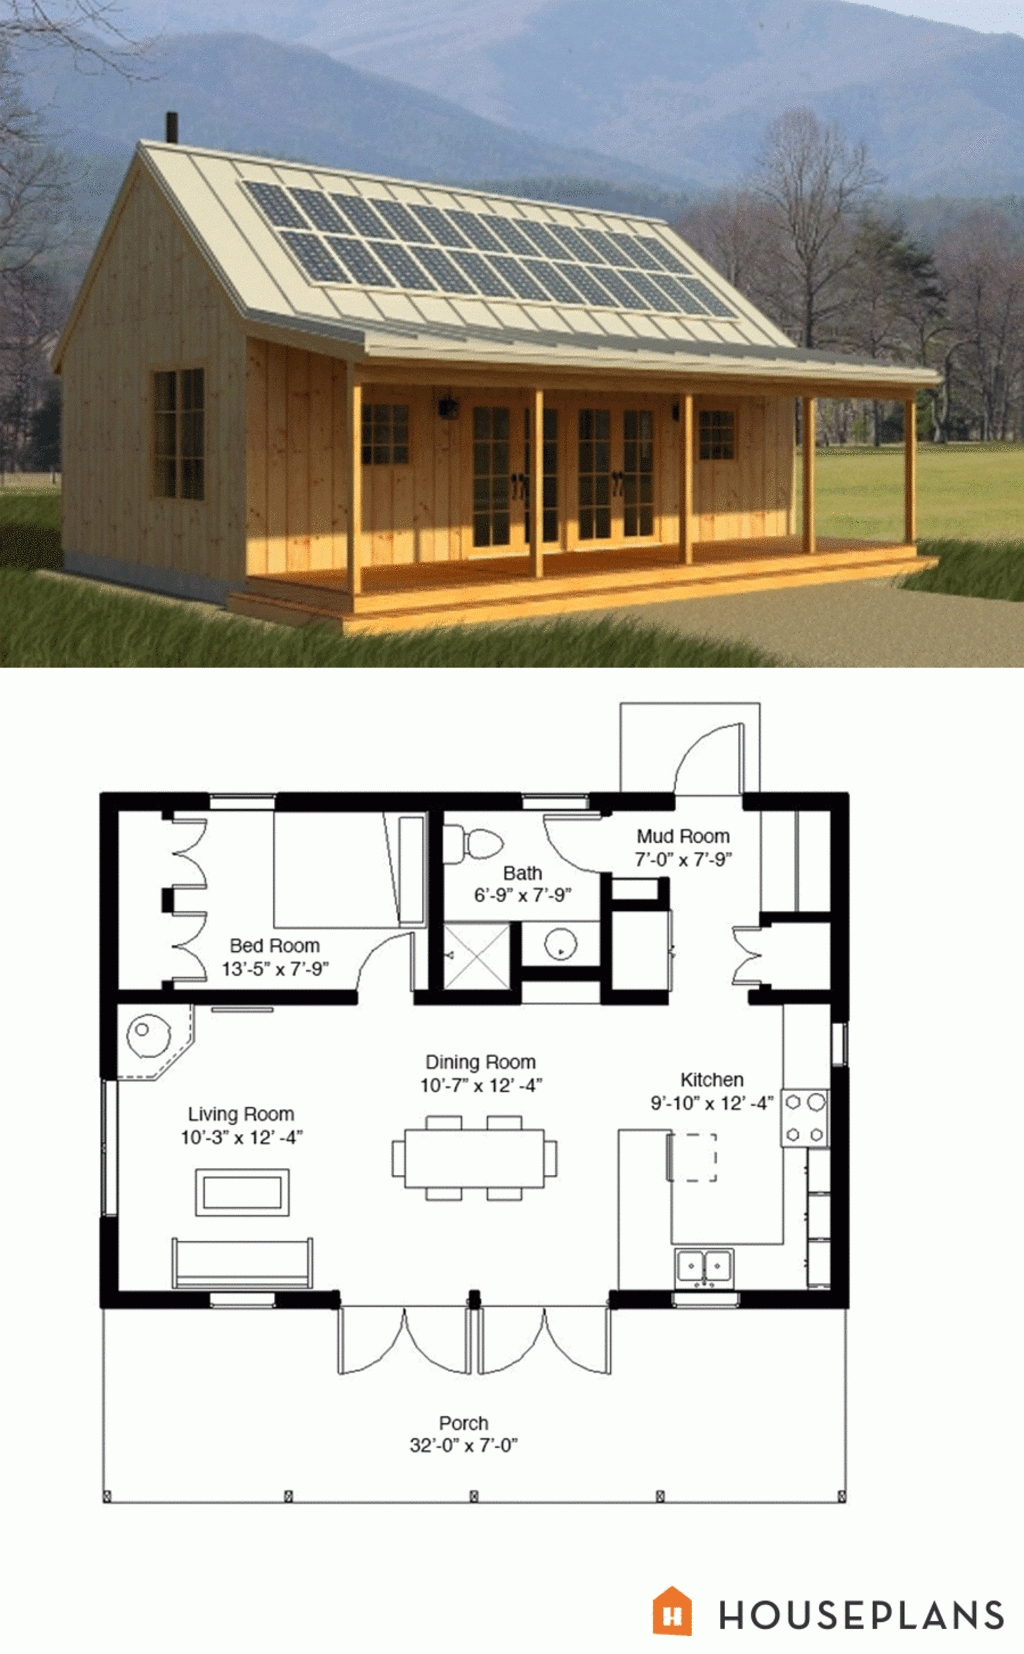 Splendid cabin style house plan 1 beds 1 baths 704 sq/ft plan #497 14 tiny within cabin floor plans